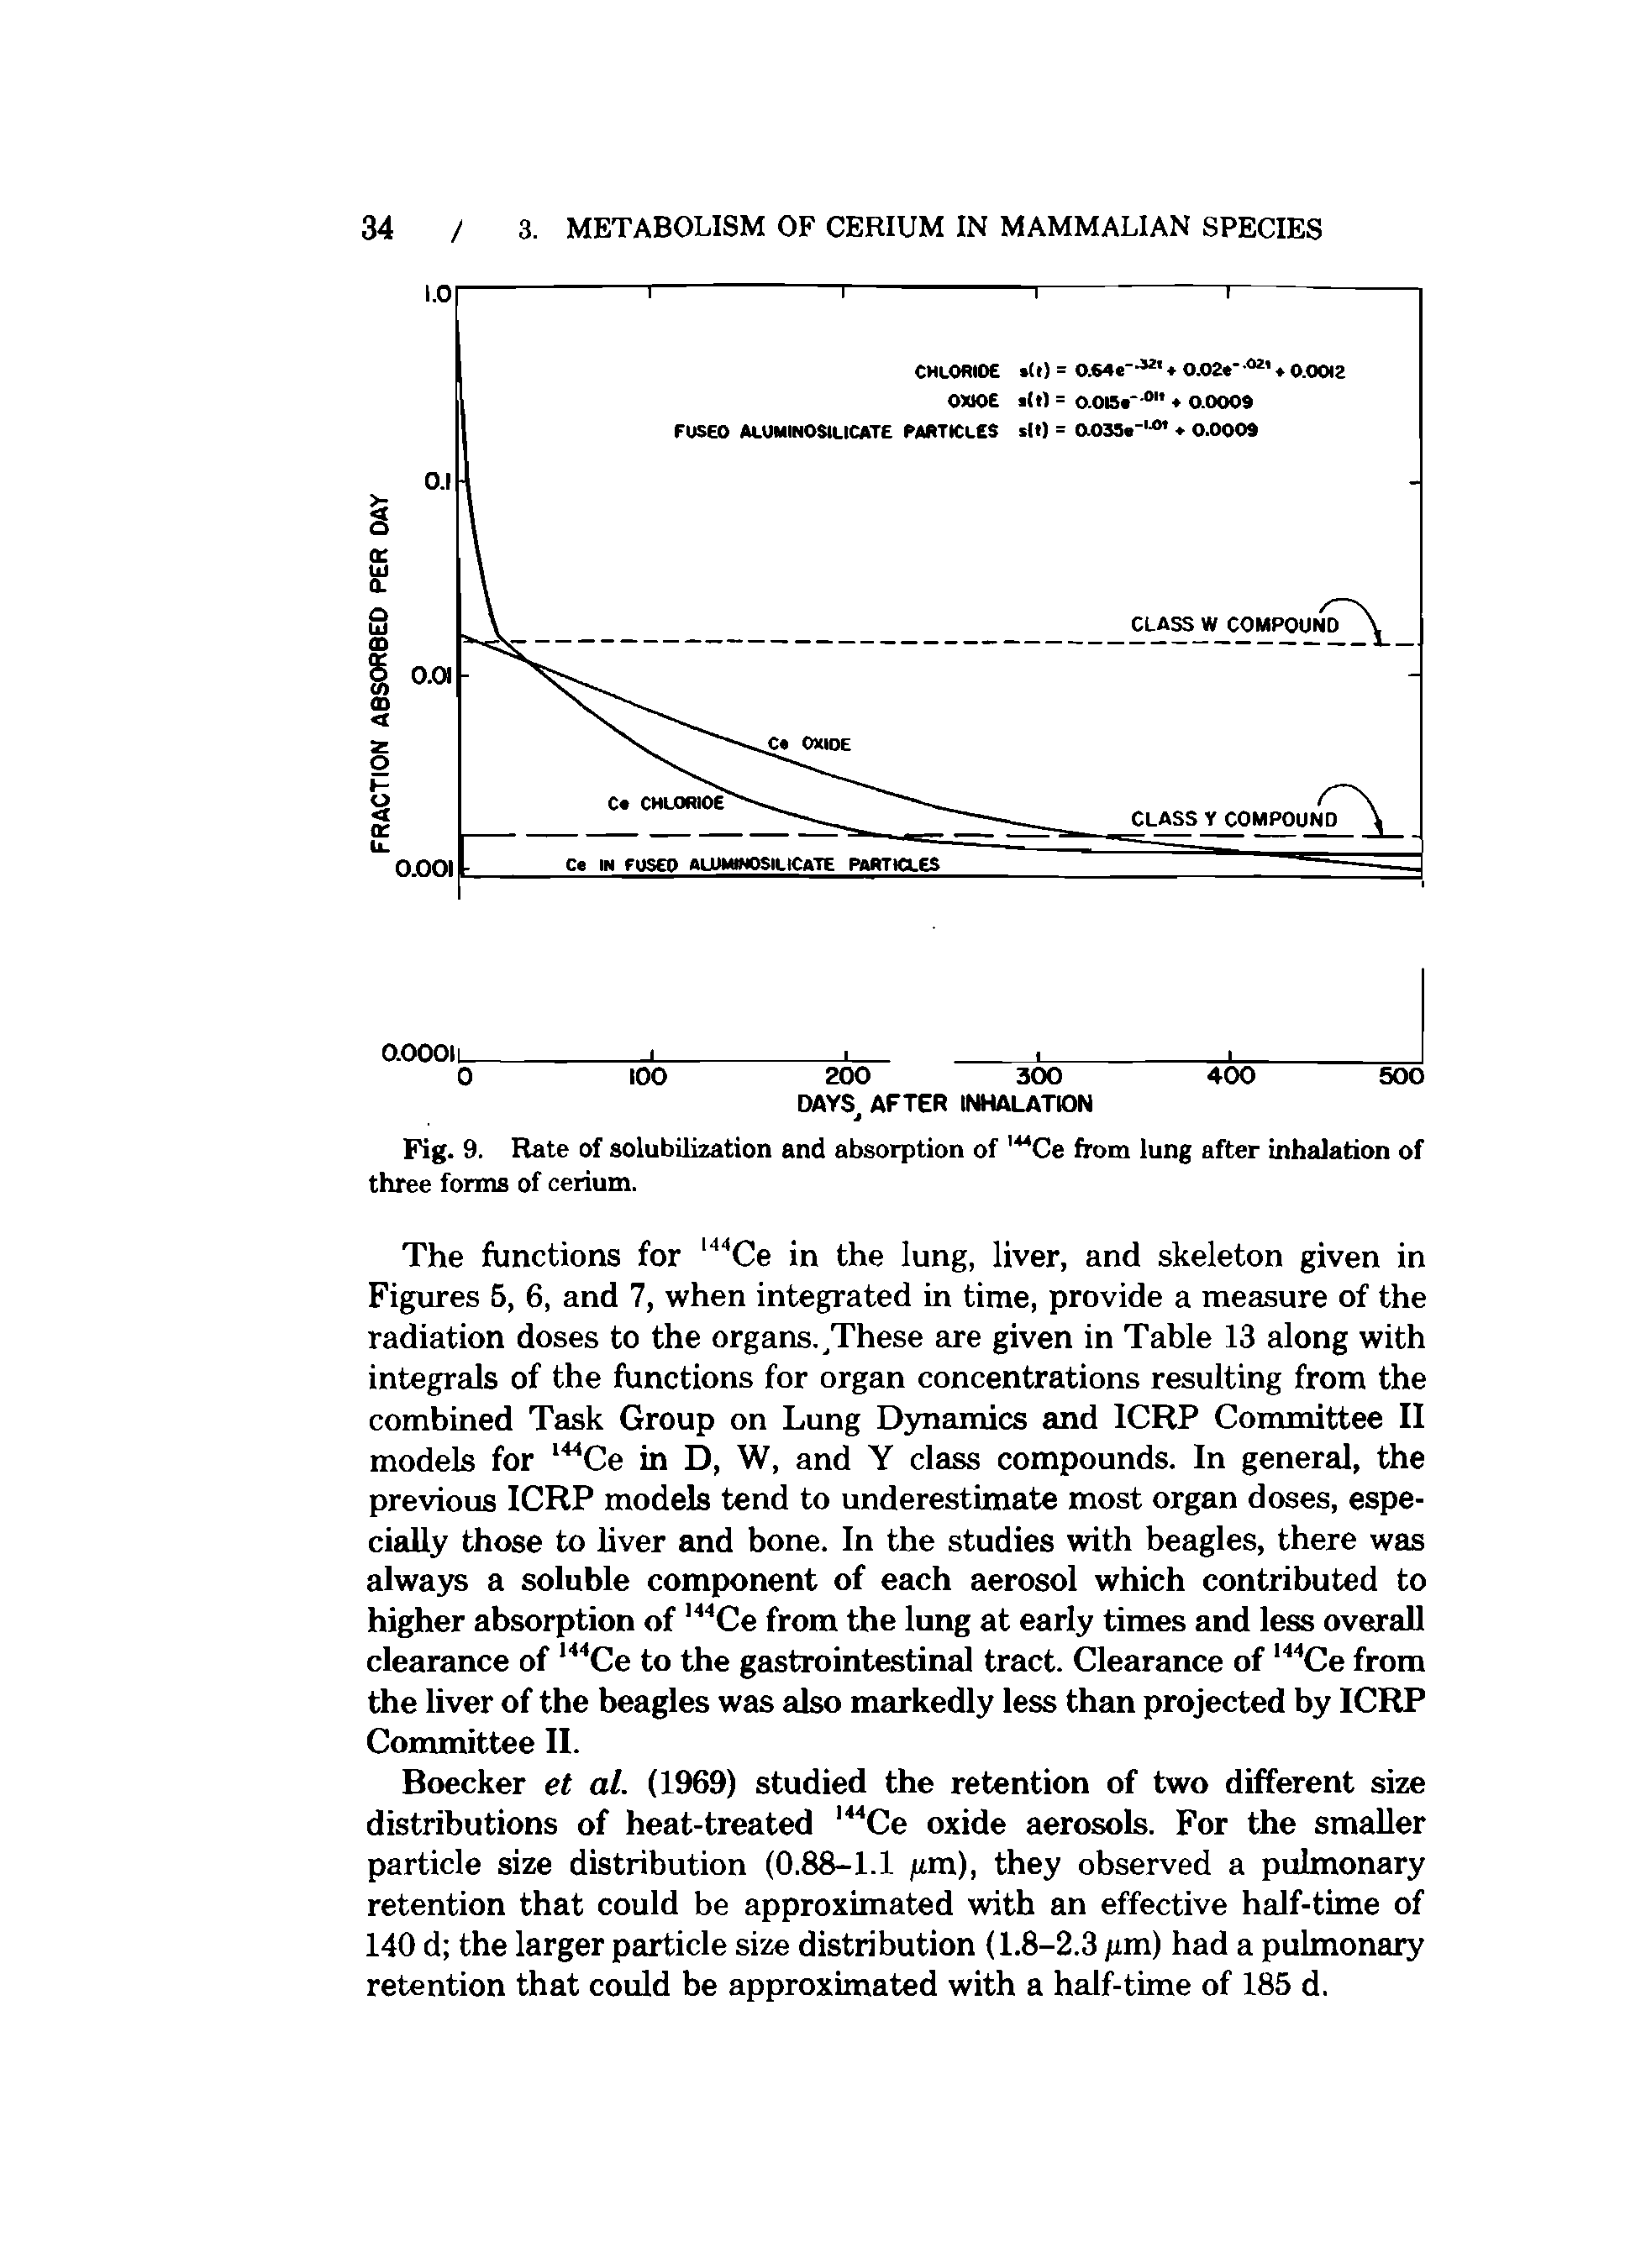 Fig. 9. Rate of solubilization and absorption of l44Ce from lung after inhalation of three forms of cerium.